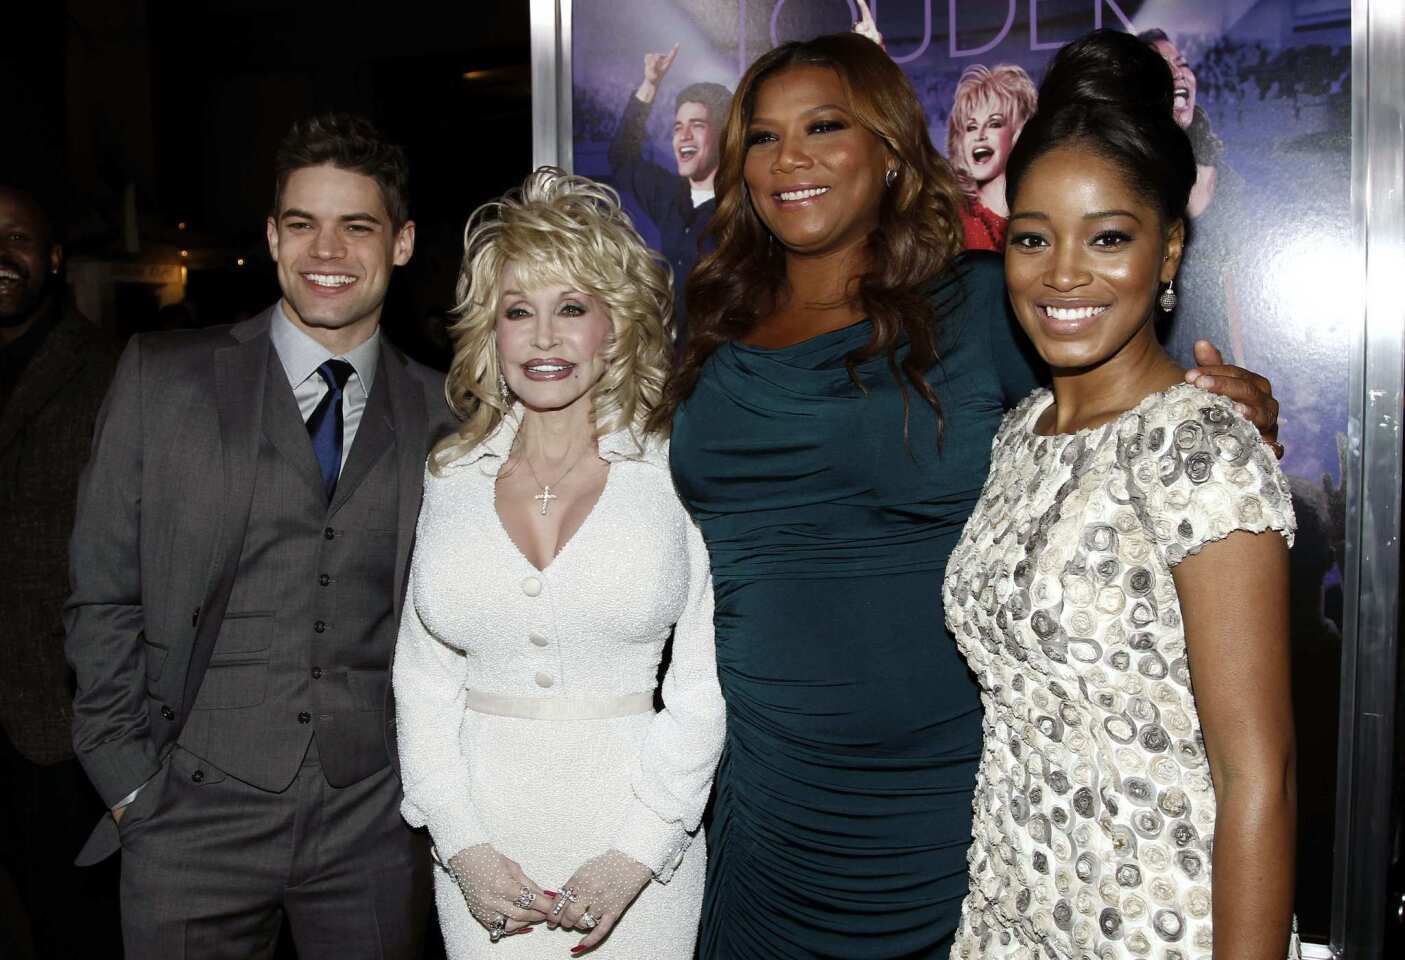 The cast of "Joyful Noise" gathered on the red carpet Monday night to celebrate the opening of its new movie musical. Jeremy Jordan, from left, Dolly Parton, Queen Latifah and Keke Palmer star in the new film about a small-town choir dealing with competing directors and budget cuts.